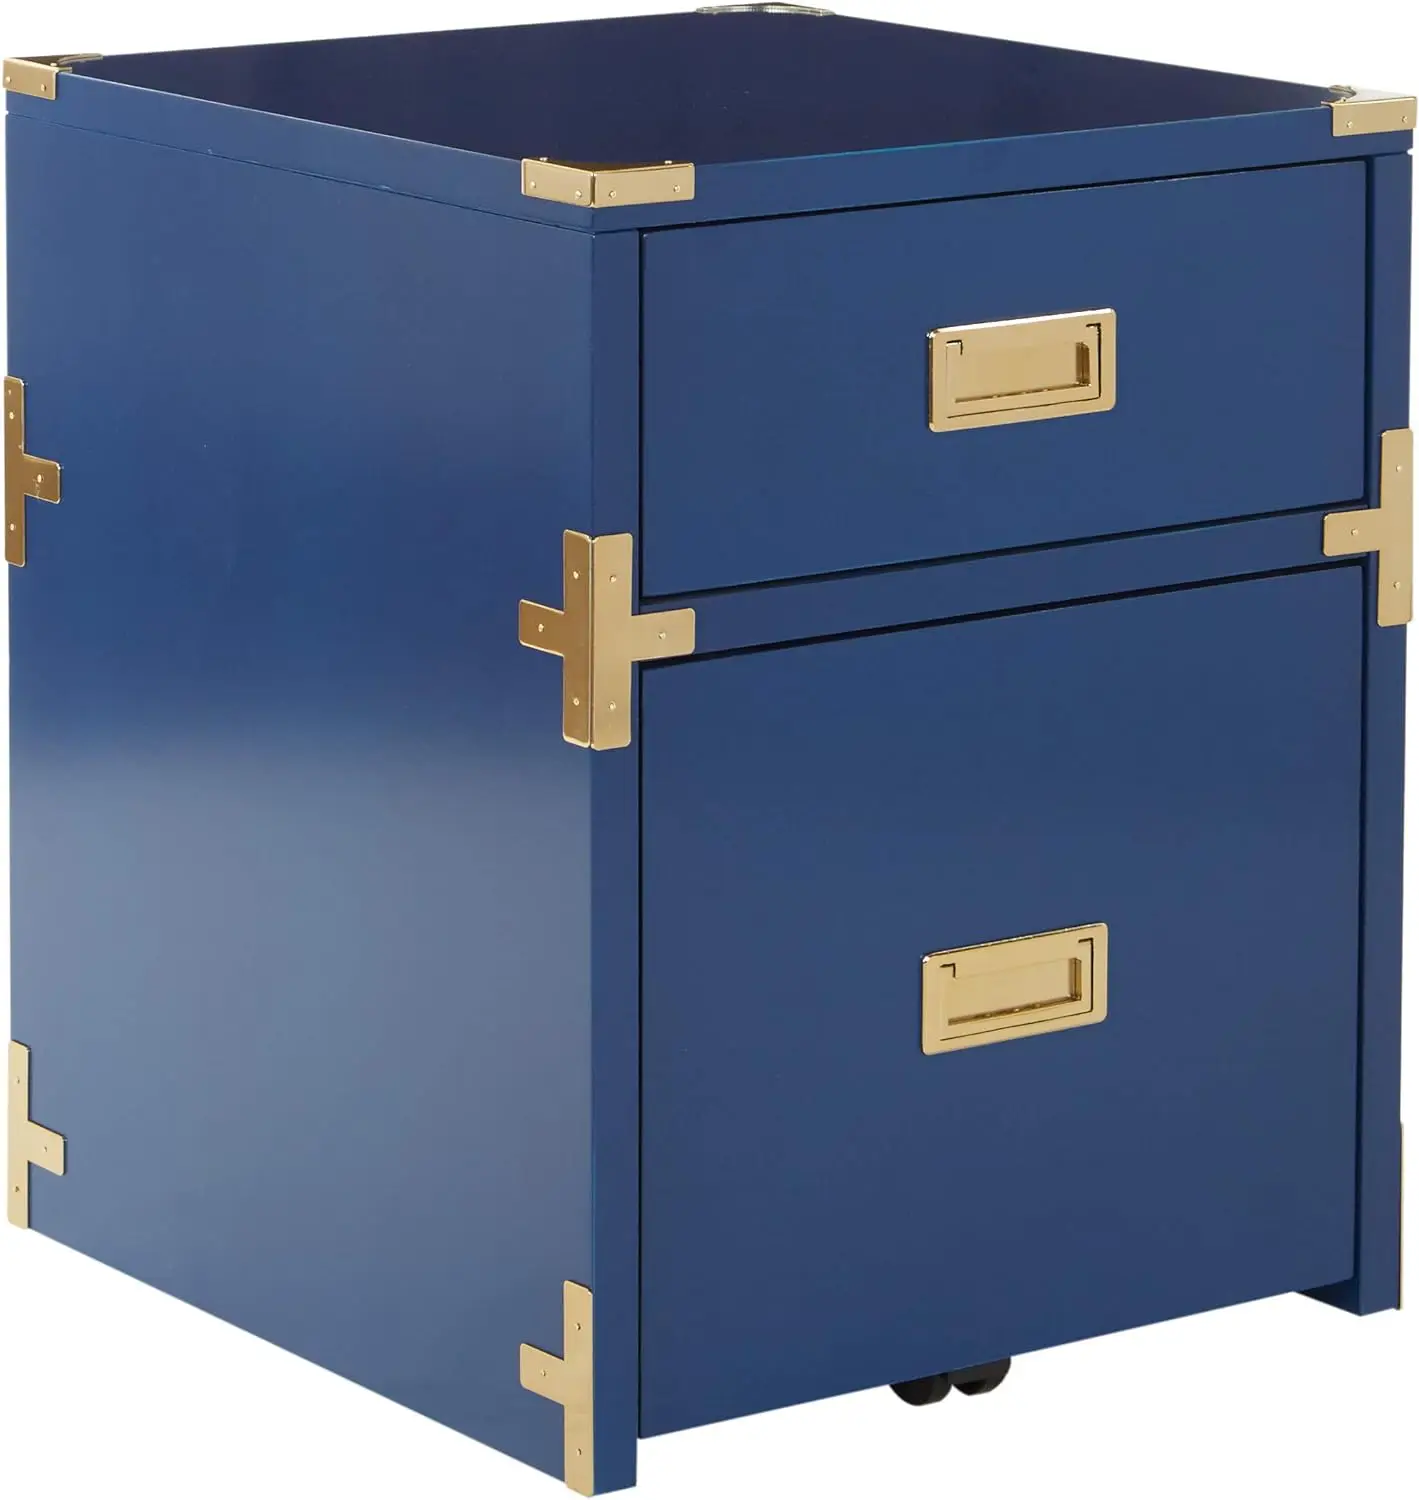 OSP Home Furnishings Wellington 2-Drawer File Cabinet, Lapis Blue office cabinet american living room porch lucky deer tv cabinet office home wine cabinet decorations creative resin european style furnishings